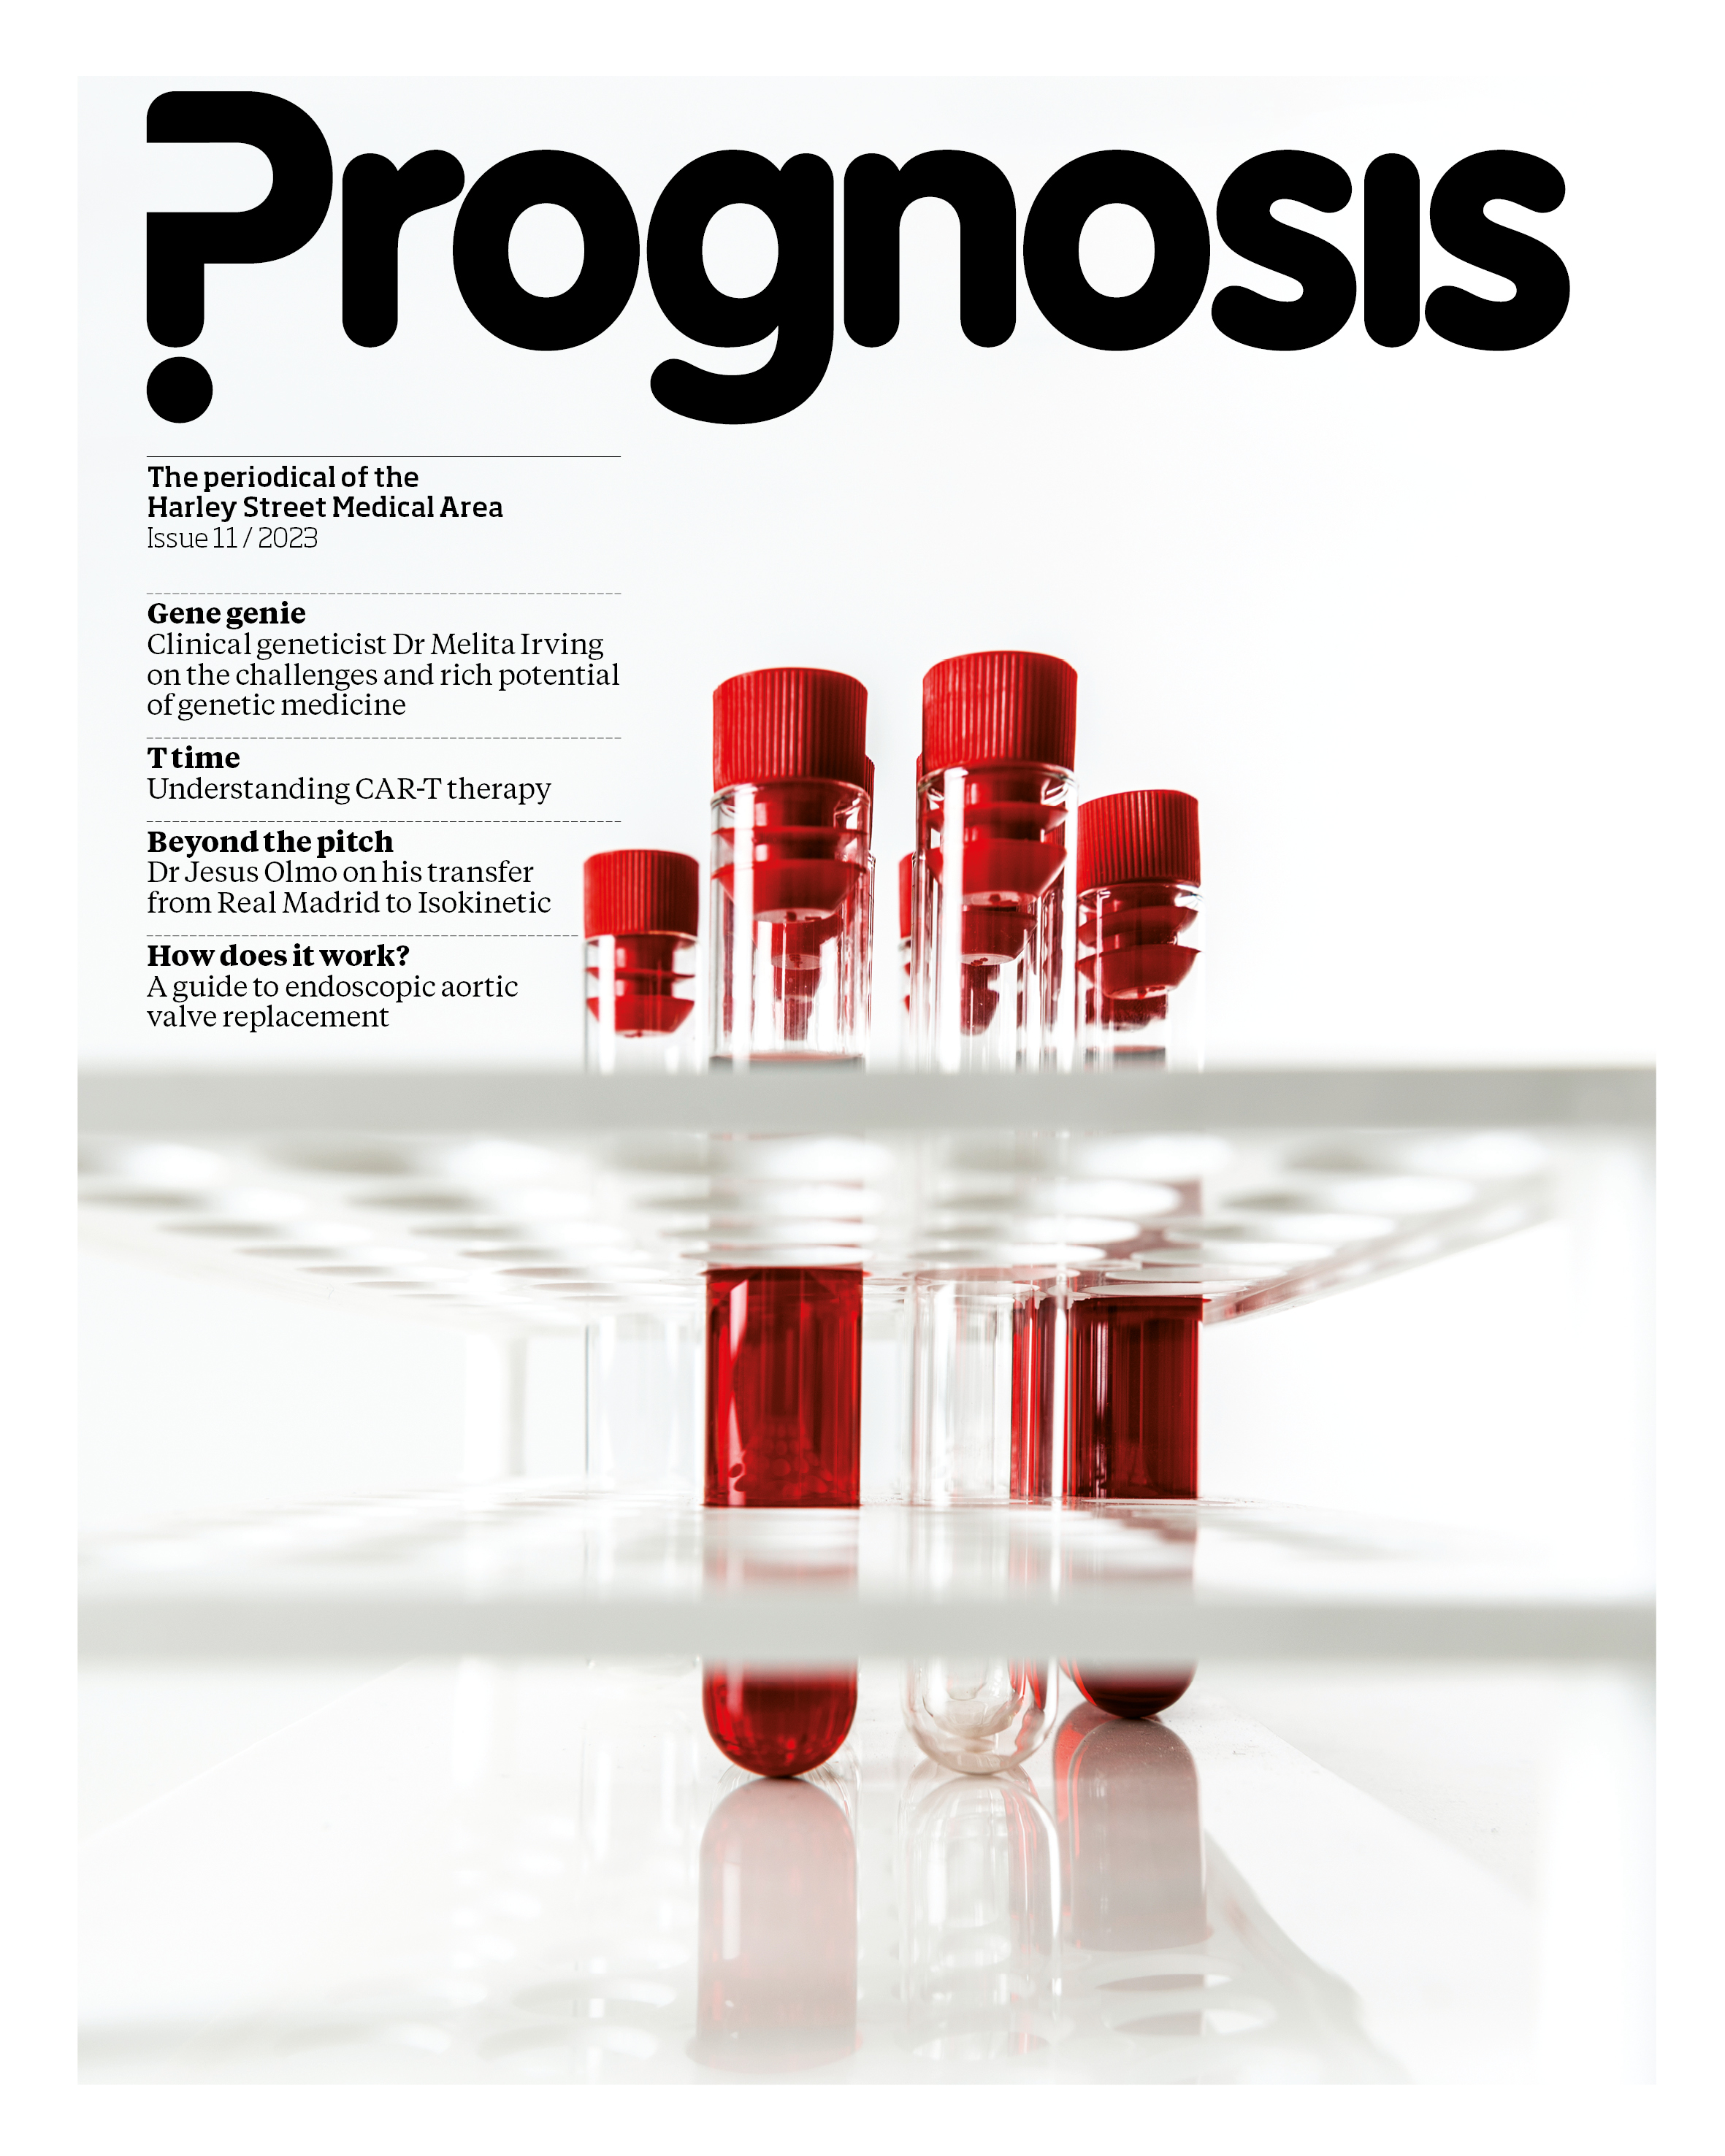 The front cover of Prognosis magazine. Over a white background sits a tray of vivid red test tubes. The contents of the magazine is listed in the top left corner.